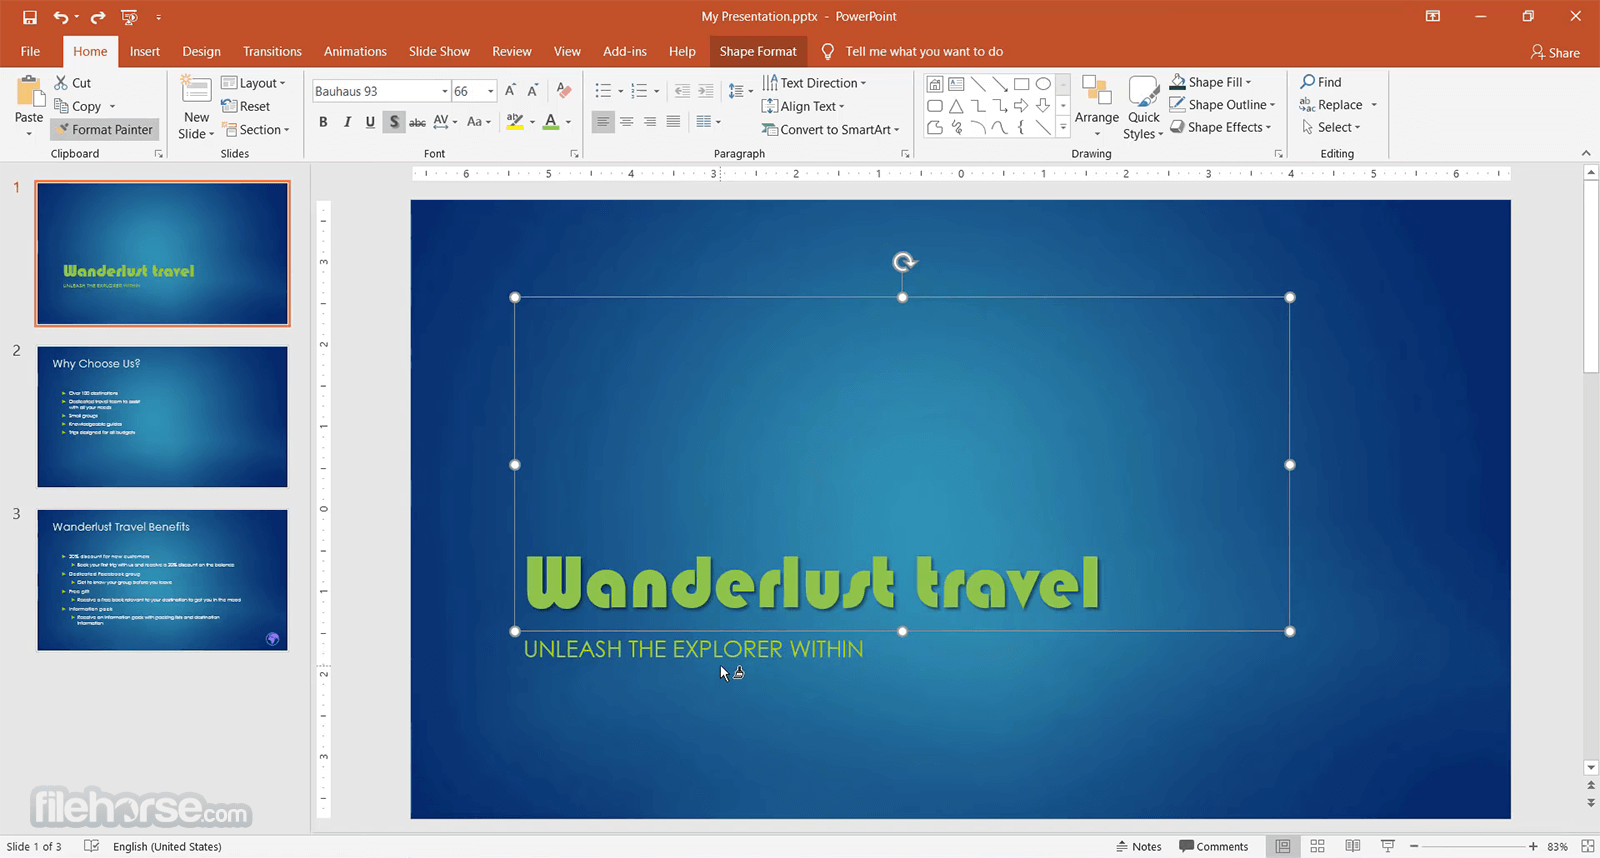 Microsoft powerpoint free download 2016